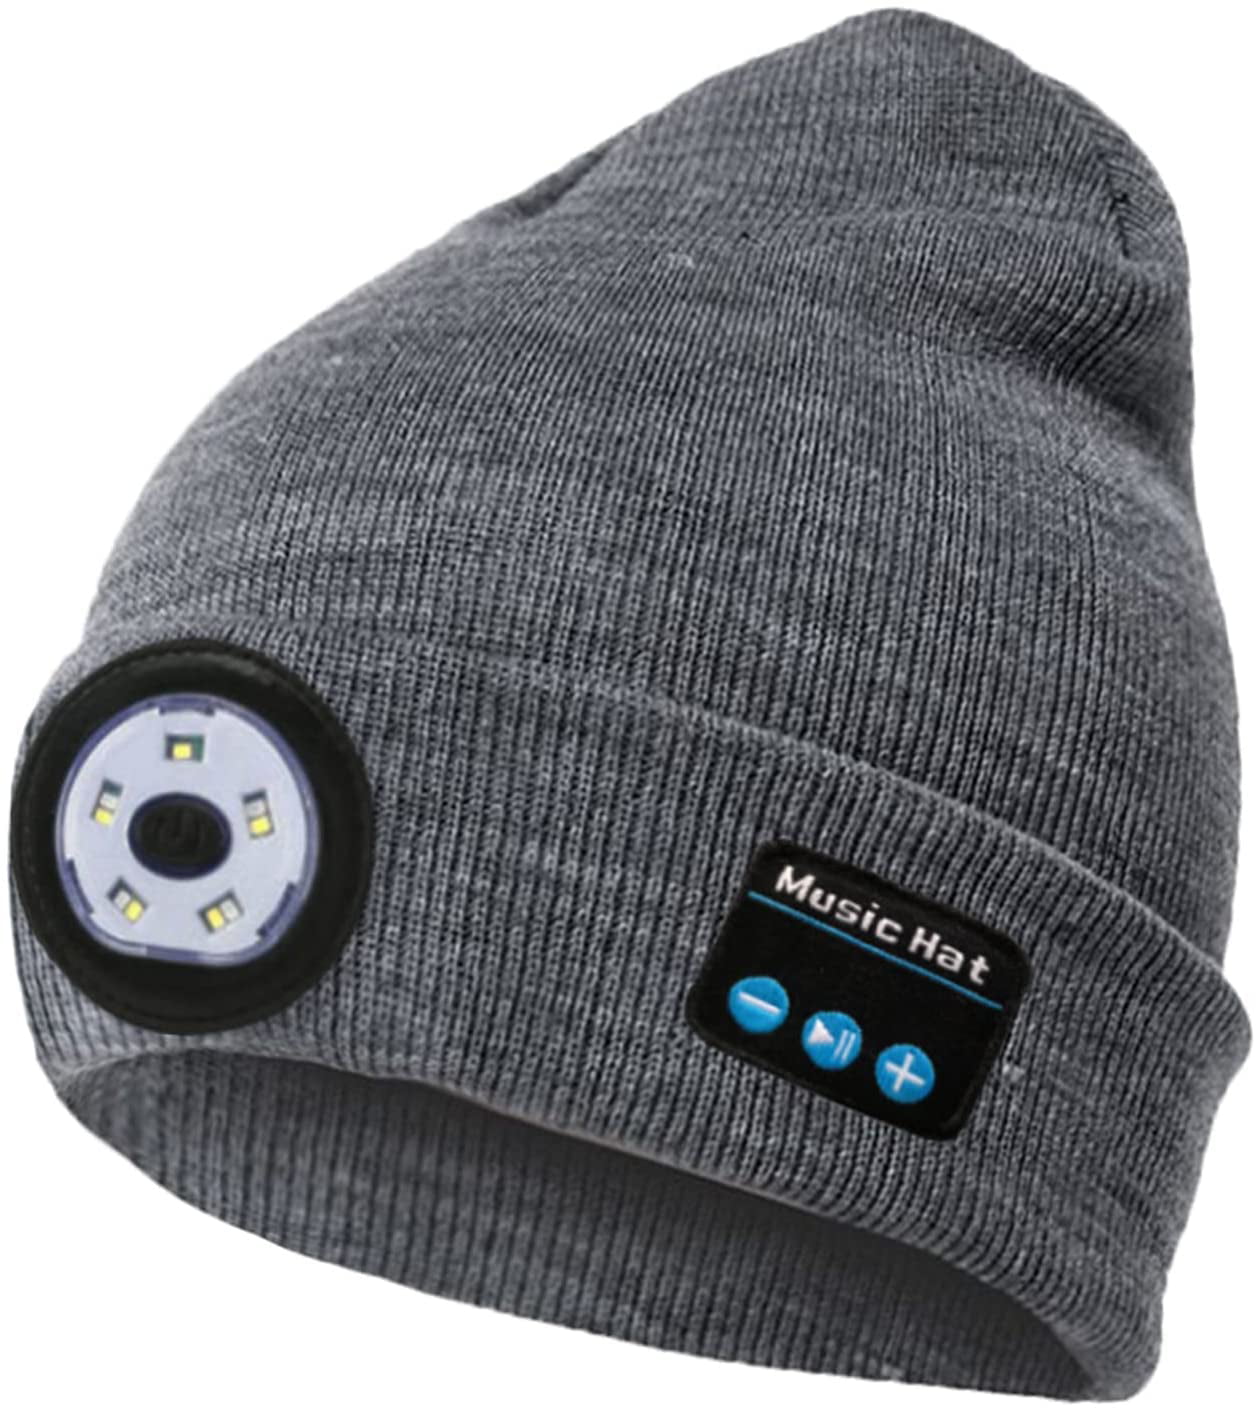 Unisex Knitted LED Headlamp Cap with Headphone Built-in Stereo Speakers&Mic,USB Rechargeable Headlight Winter Warm Gifts for Men Dad Him Women Running,Fishing Upgraded Bluetooth Beanie Hat with Light 